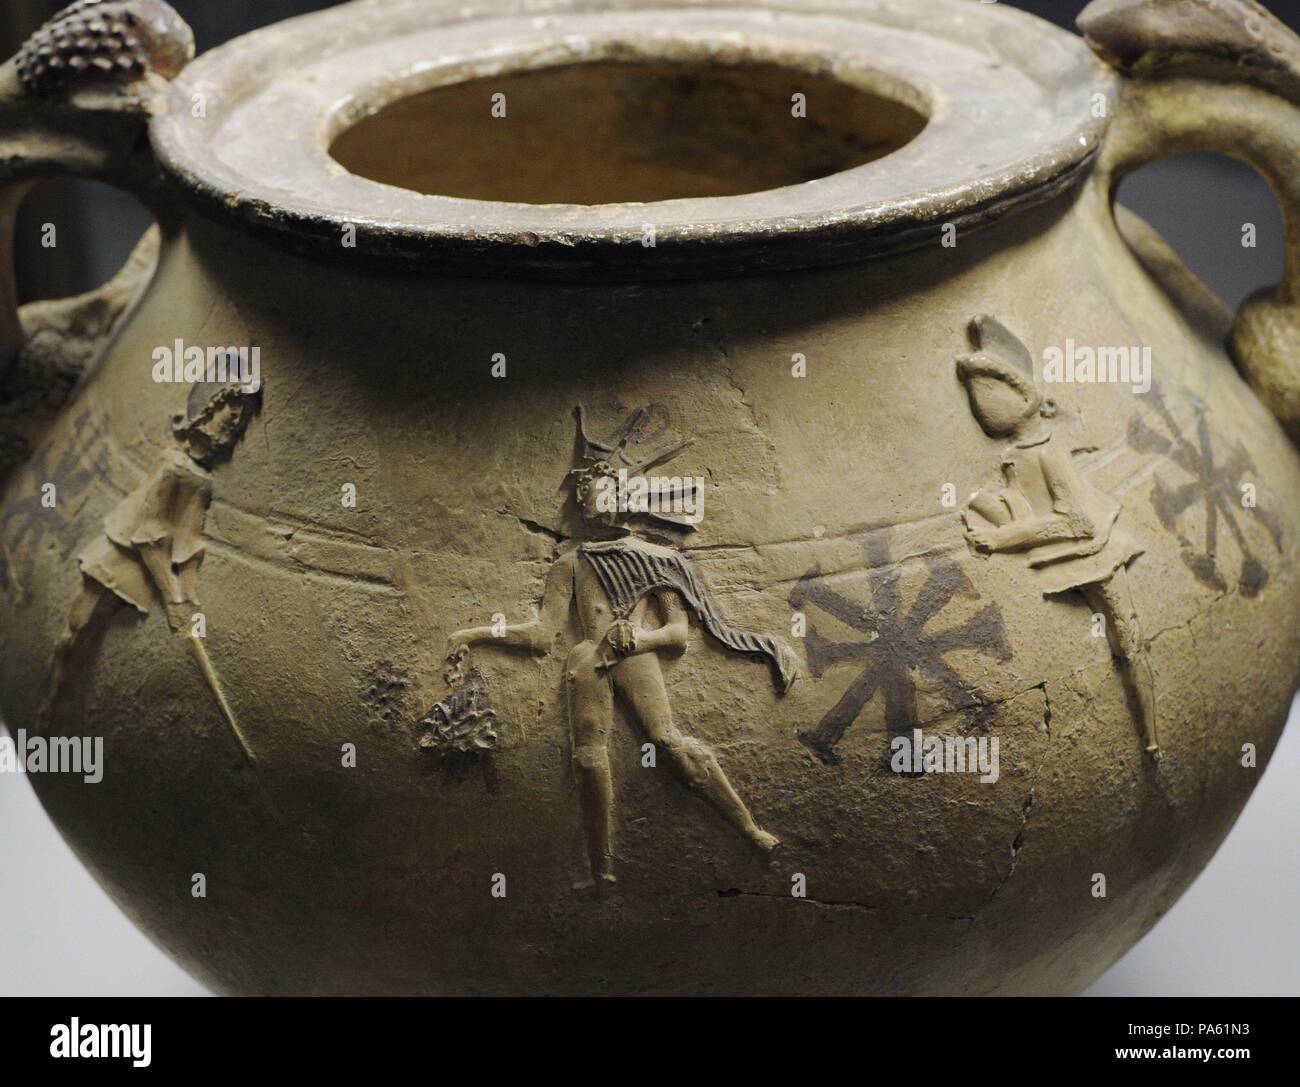 Pottery depicting Mithras surrounded by the torch-bearers Cautes and Cautopates. 2nd-3rd centuries. From Cologne, Germany. Roman-Germanic Museum. Cologne. Germany. Stock Photo